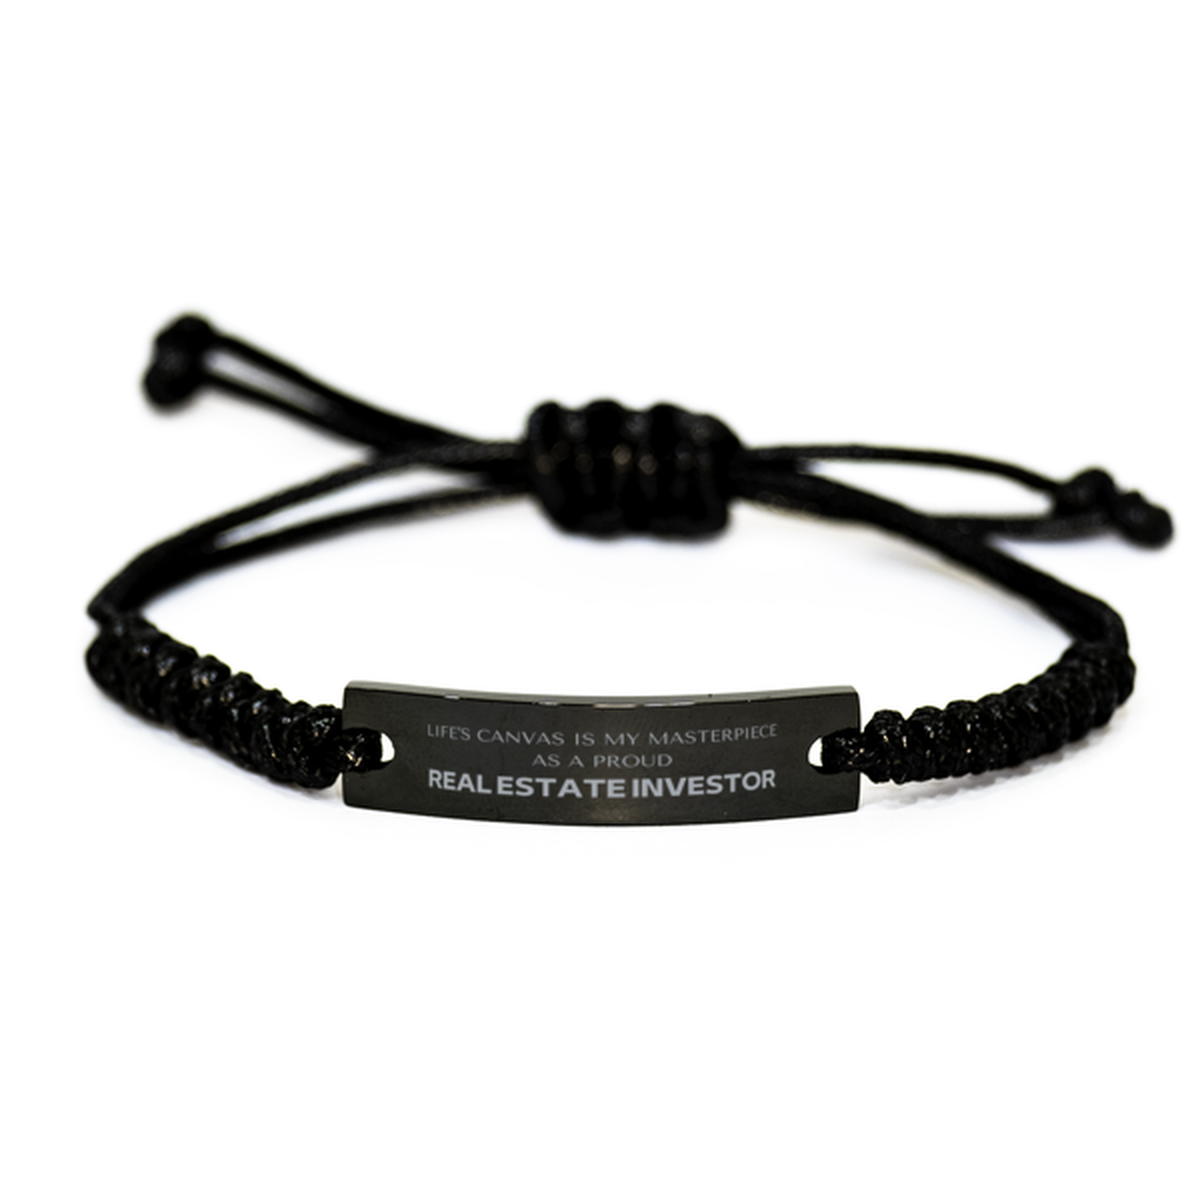 Proud Real Estate Investor Gifts, Life's canvas is my masterpiece, Epic Birthday Christmas Unique Black Rope Bracelet For Real Estate Investor, Coworkers, Men, Women, Friends